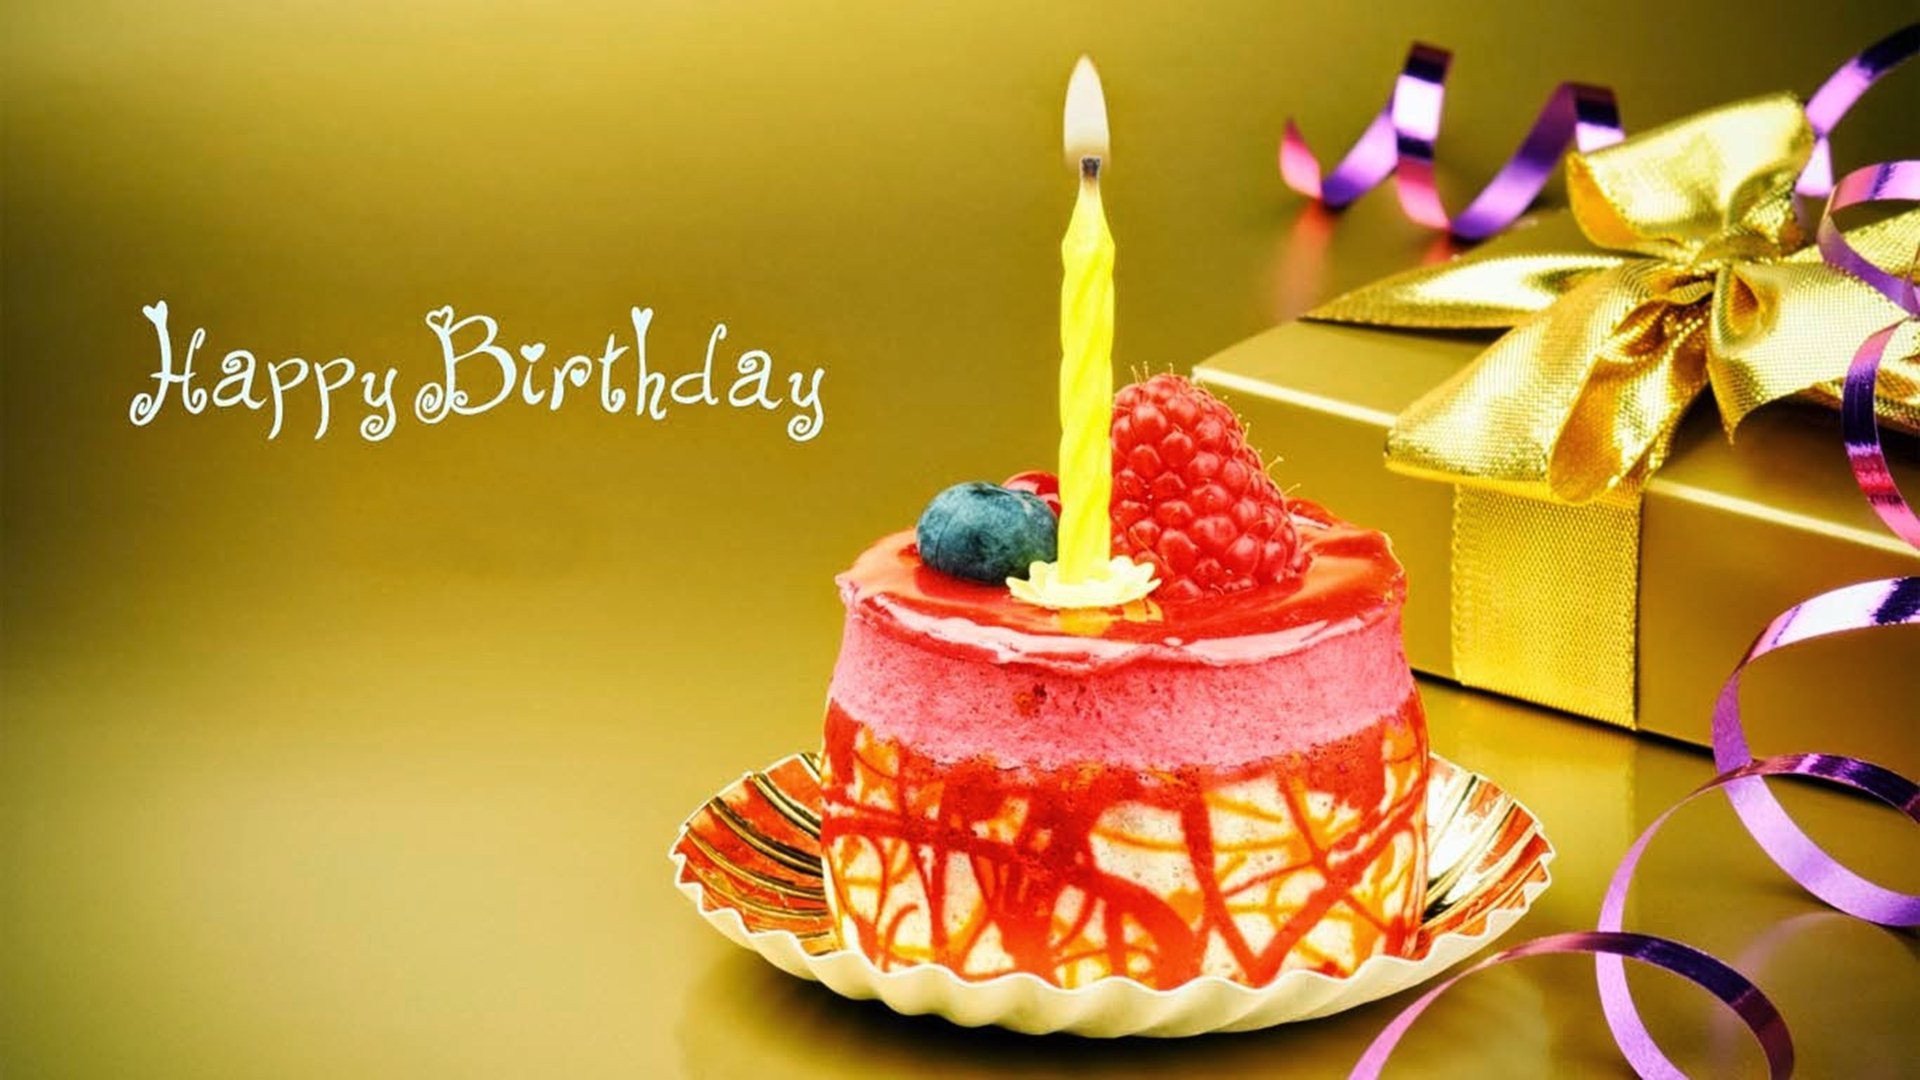 Images Of Happy Birthday Wishes
 birthday wishes images HD